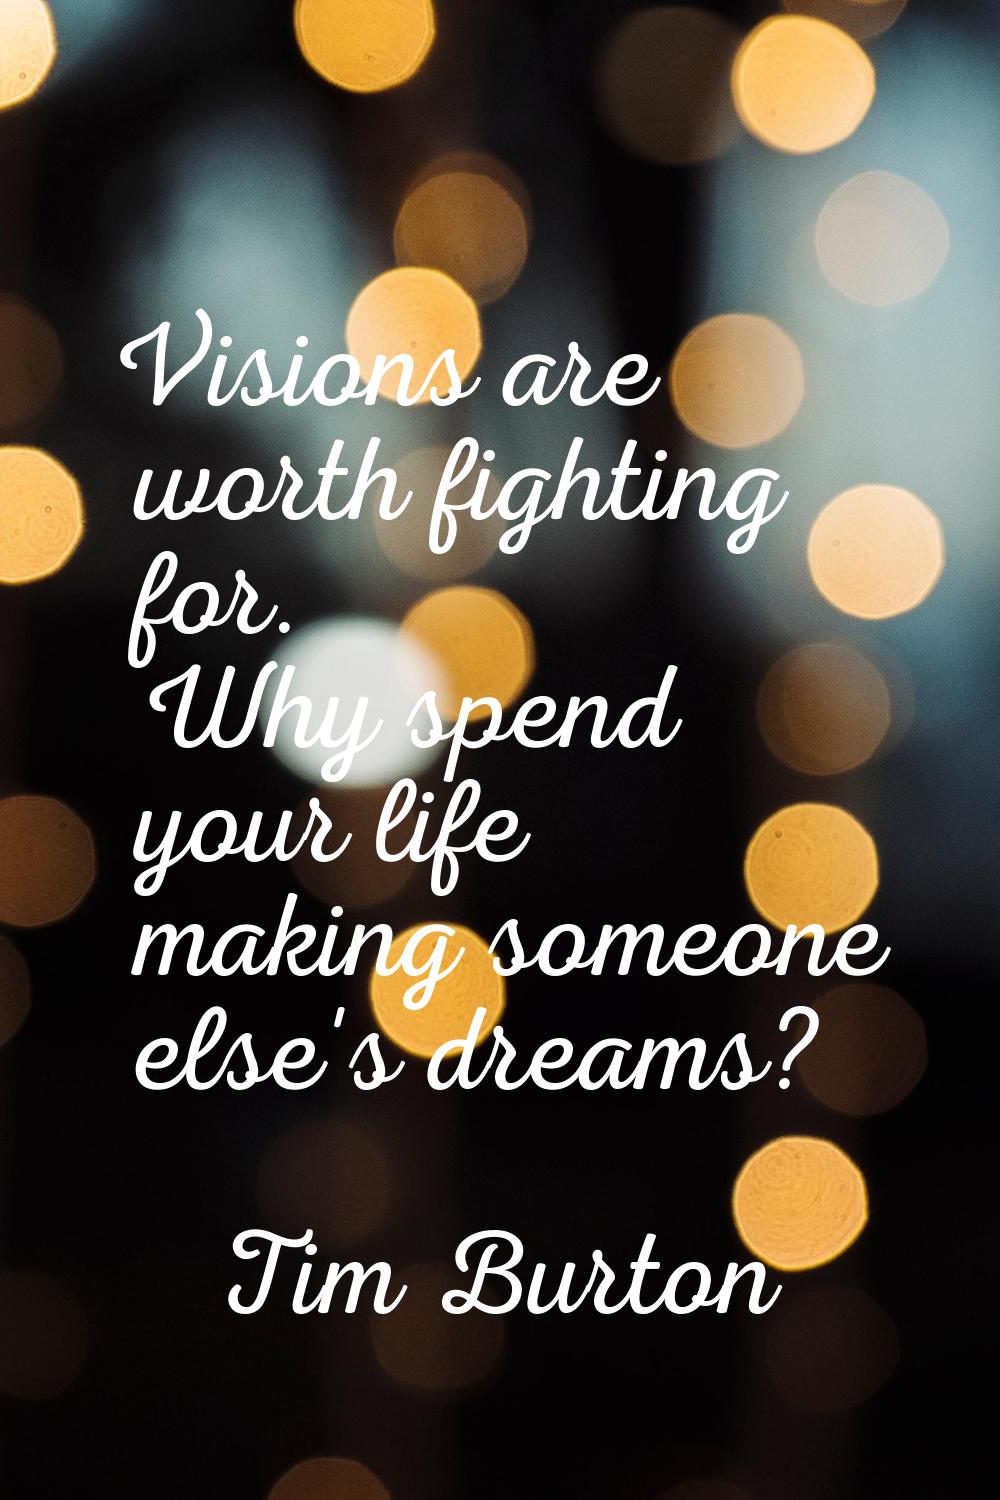 Visions are worth fighting for. Why spend your life making someone else's dreams?